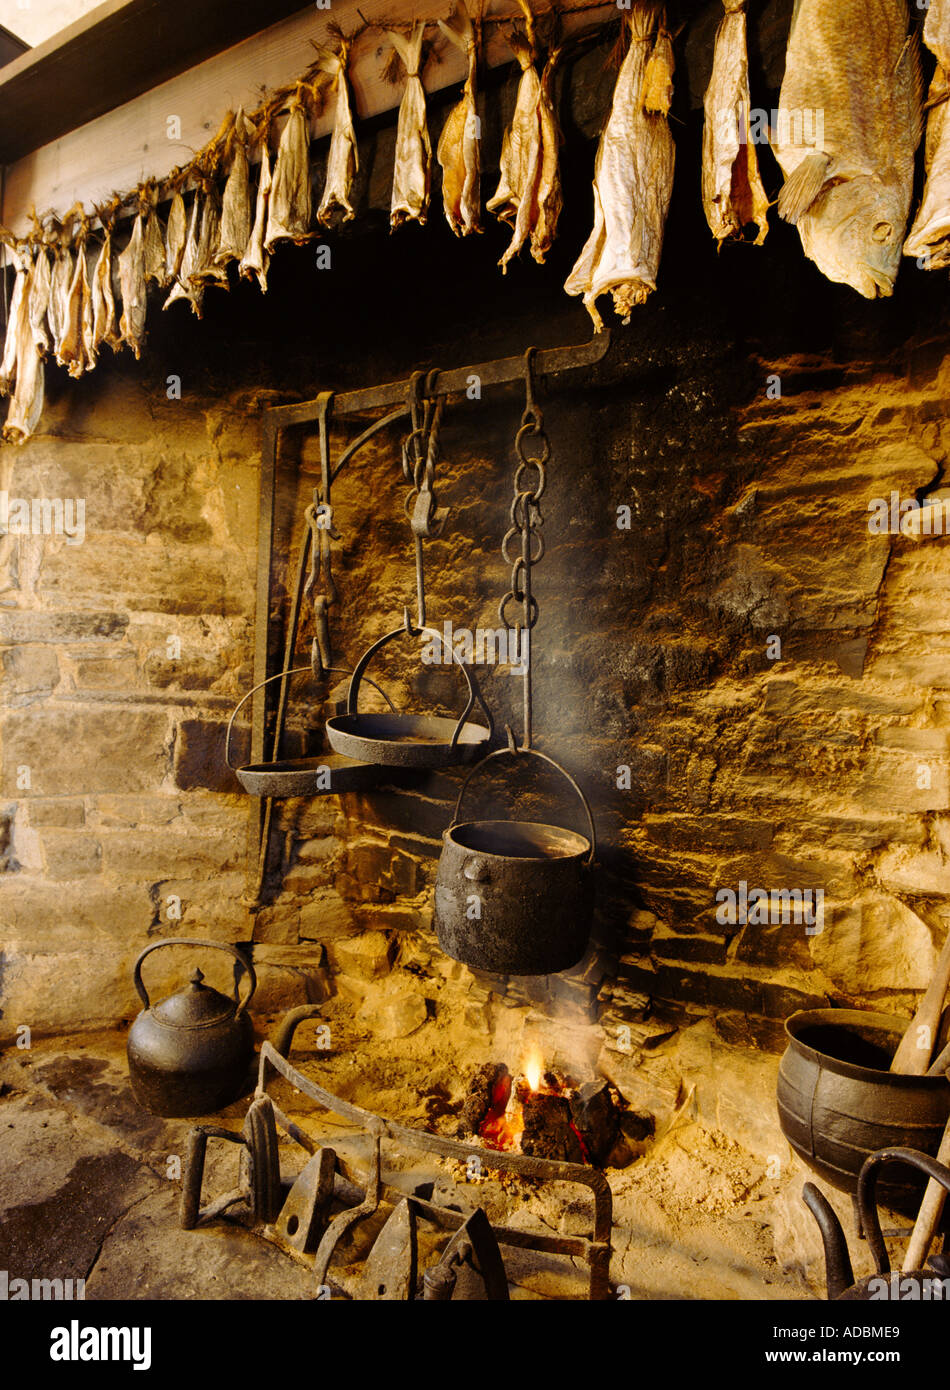 dh Tourist Farm Farmhouse cottage CORRIGALL MUSEUM ORKNEY Fireplace hanging dried fish drying hearth open fire cured peat burning interior Stock Photo